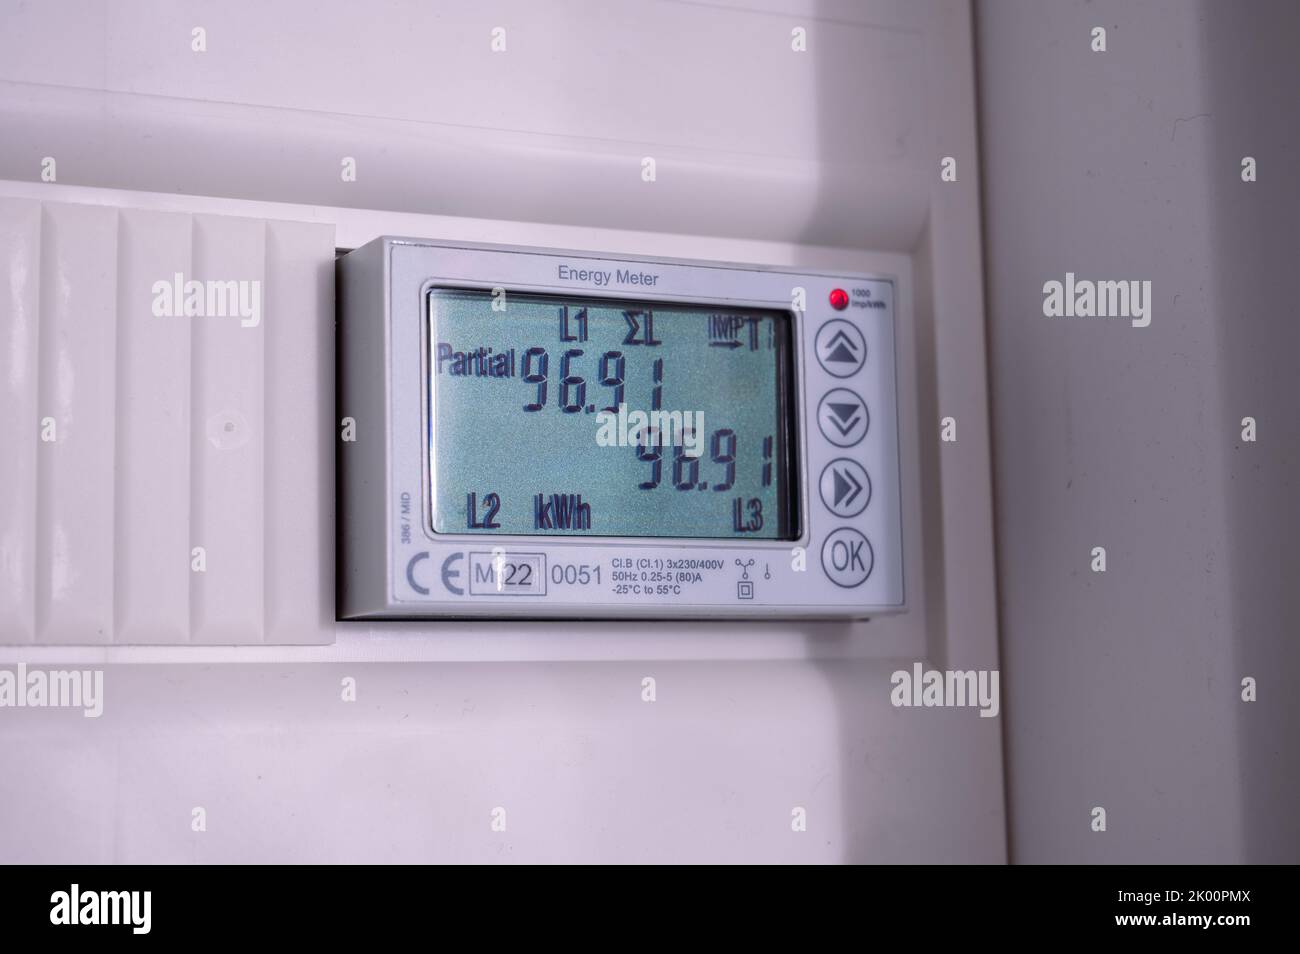 3-phase smart Energy meter 3-phase for 2-stage self-generated electricity usage counts the self generated Watt hours Stock Photo